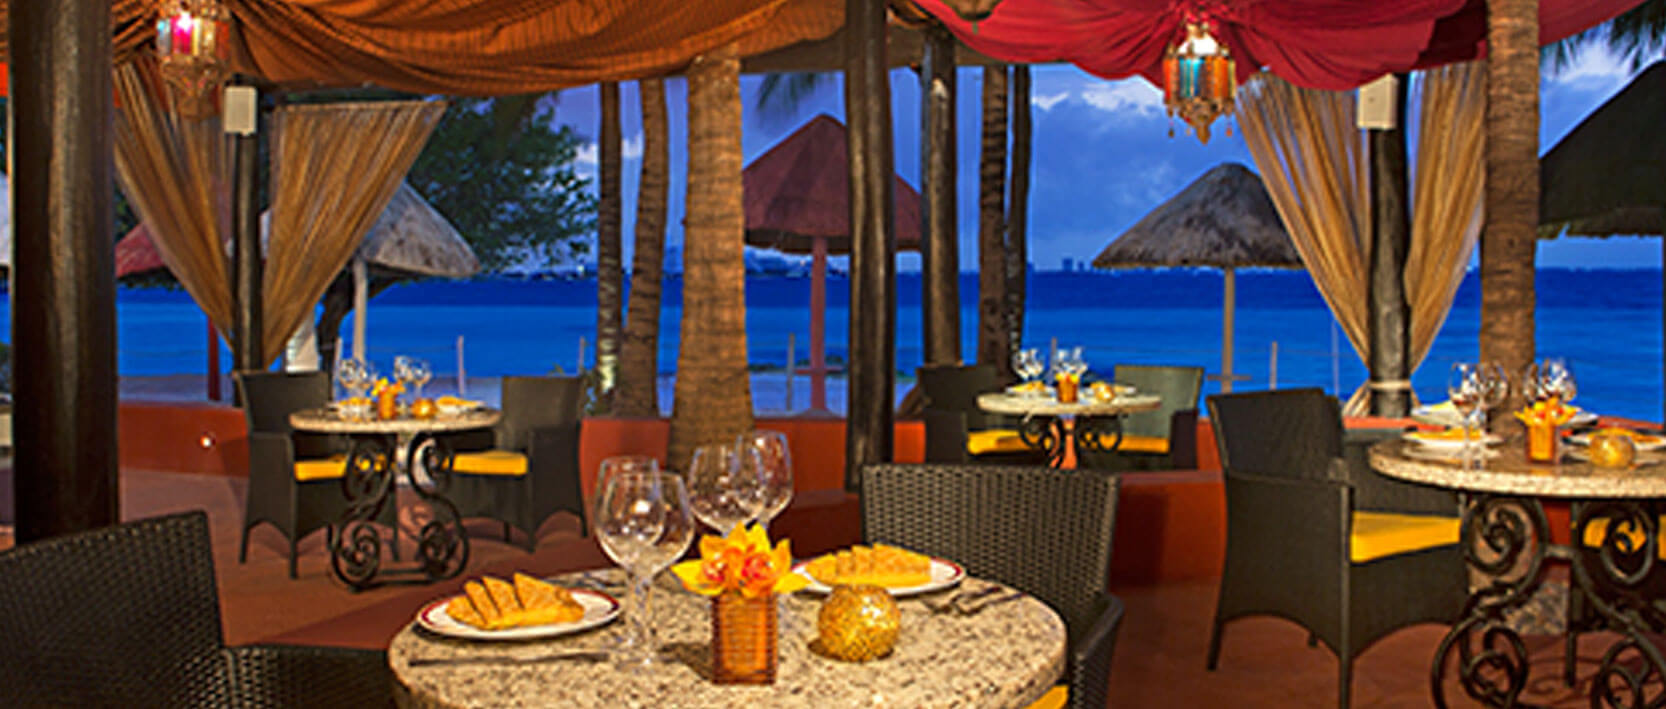 Dreams Sands Cancun Restaurants and Bars - Olio